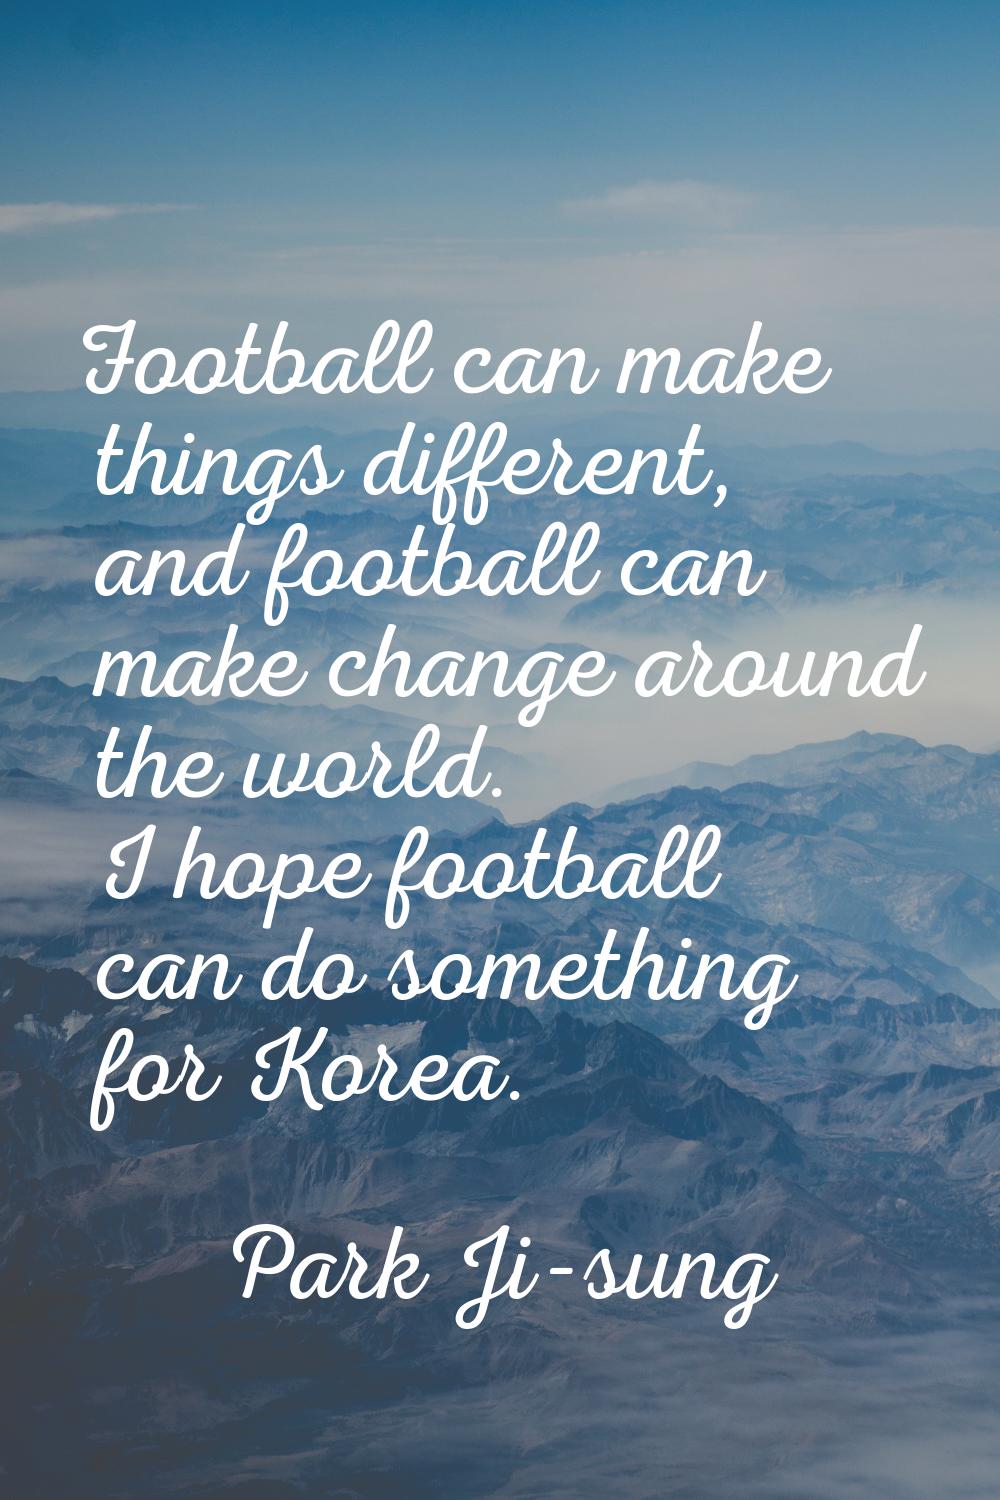 Football can make things different, and football can make change around the world. I hope football 